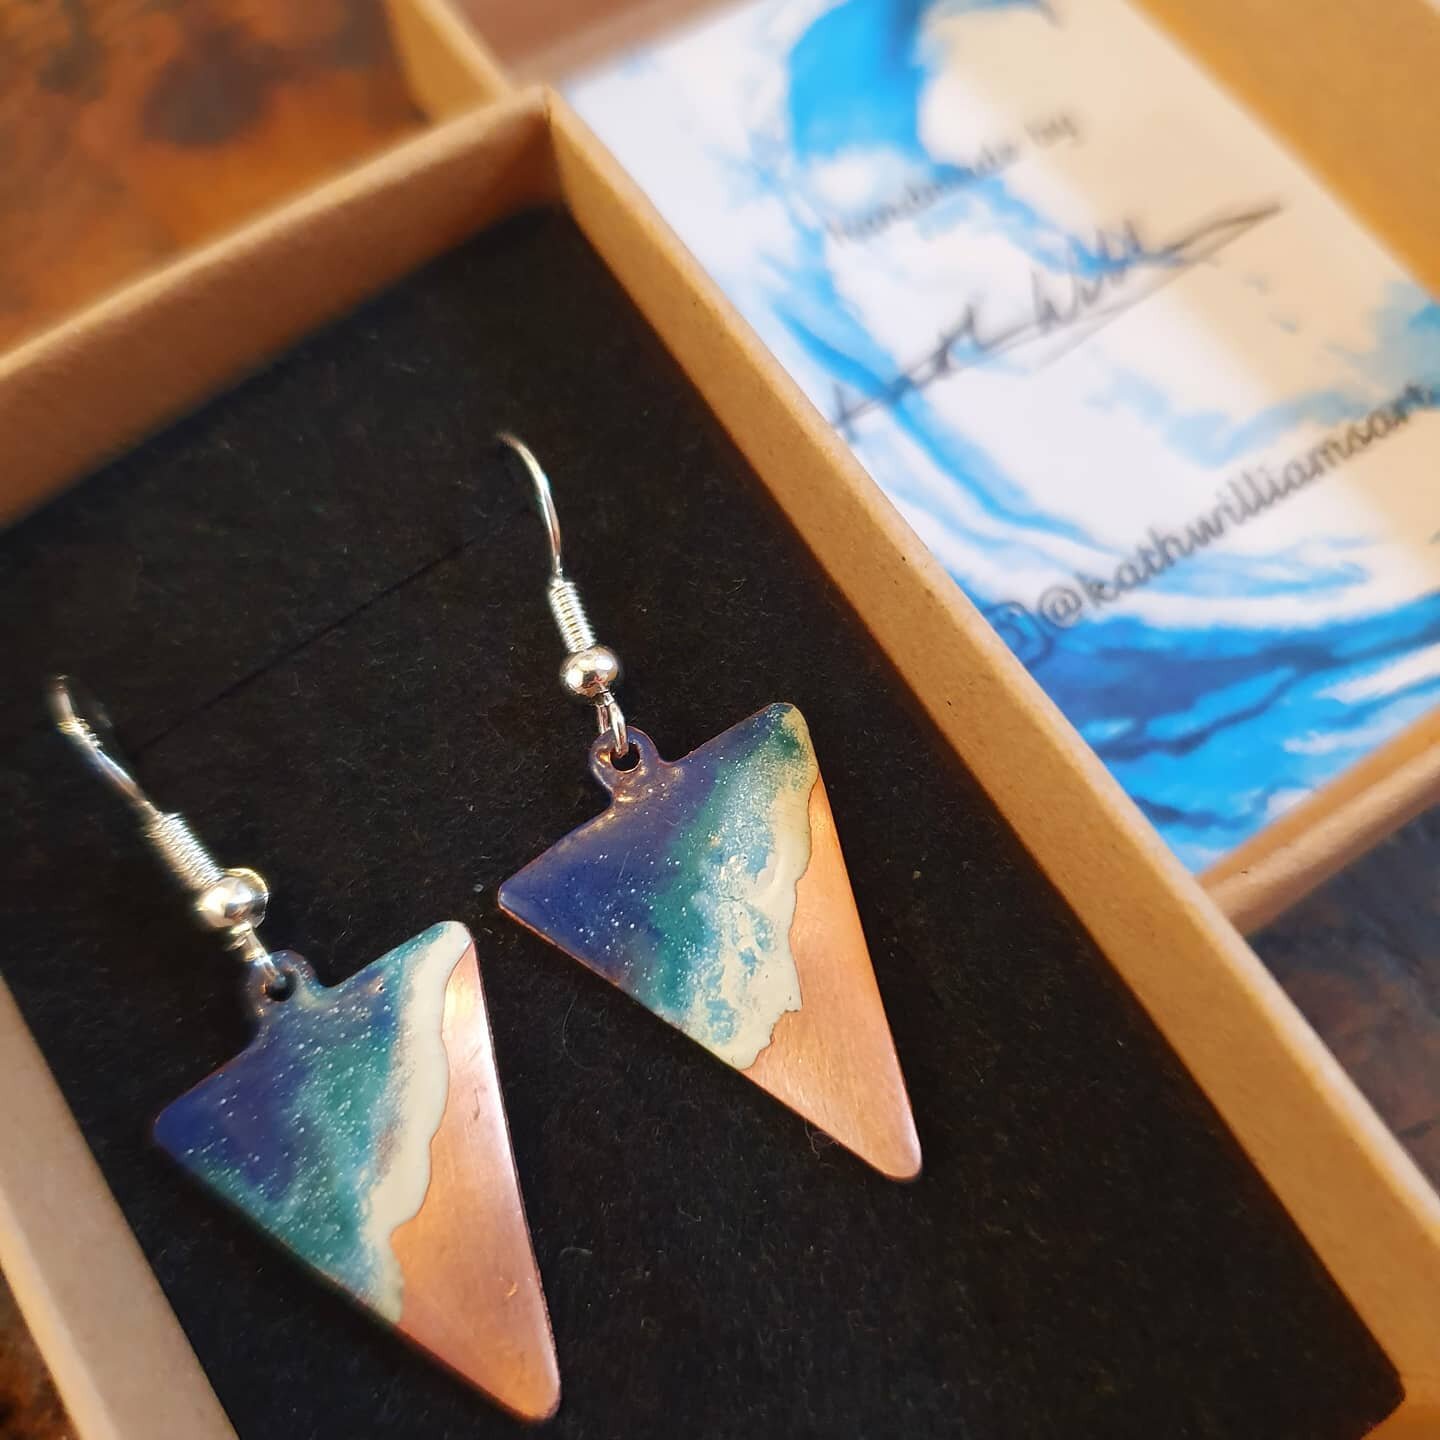 I've had flurry of orders this week which has been lovely. This pair have now been boxed and are ready to be posted!

#madeinstroud #handmadejewellery #handmadegifts #handcraftedjewellery #handcrafted #handmade #enamel #enamelart #enamelcraft #enamel